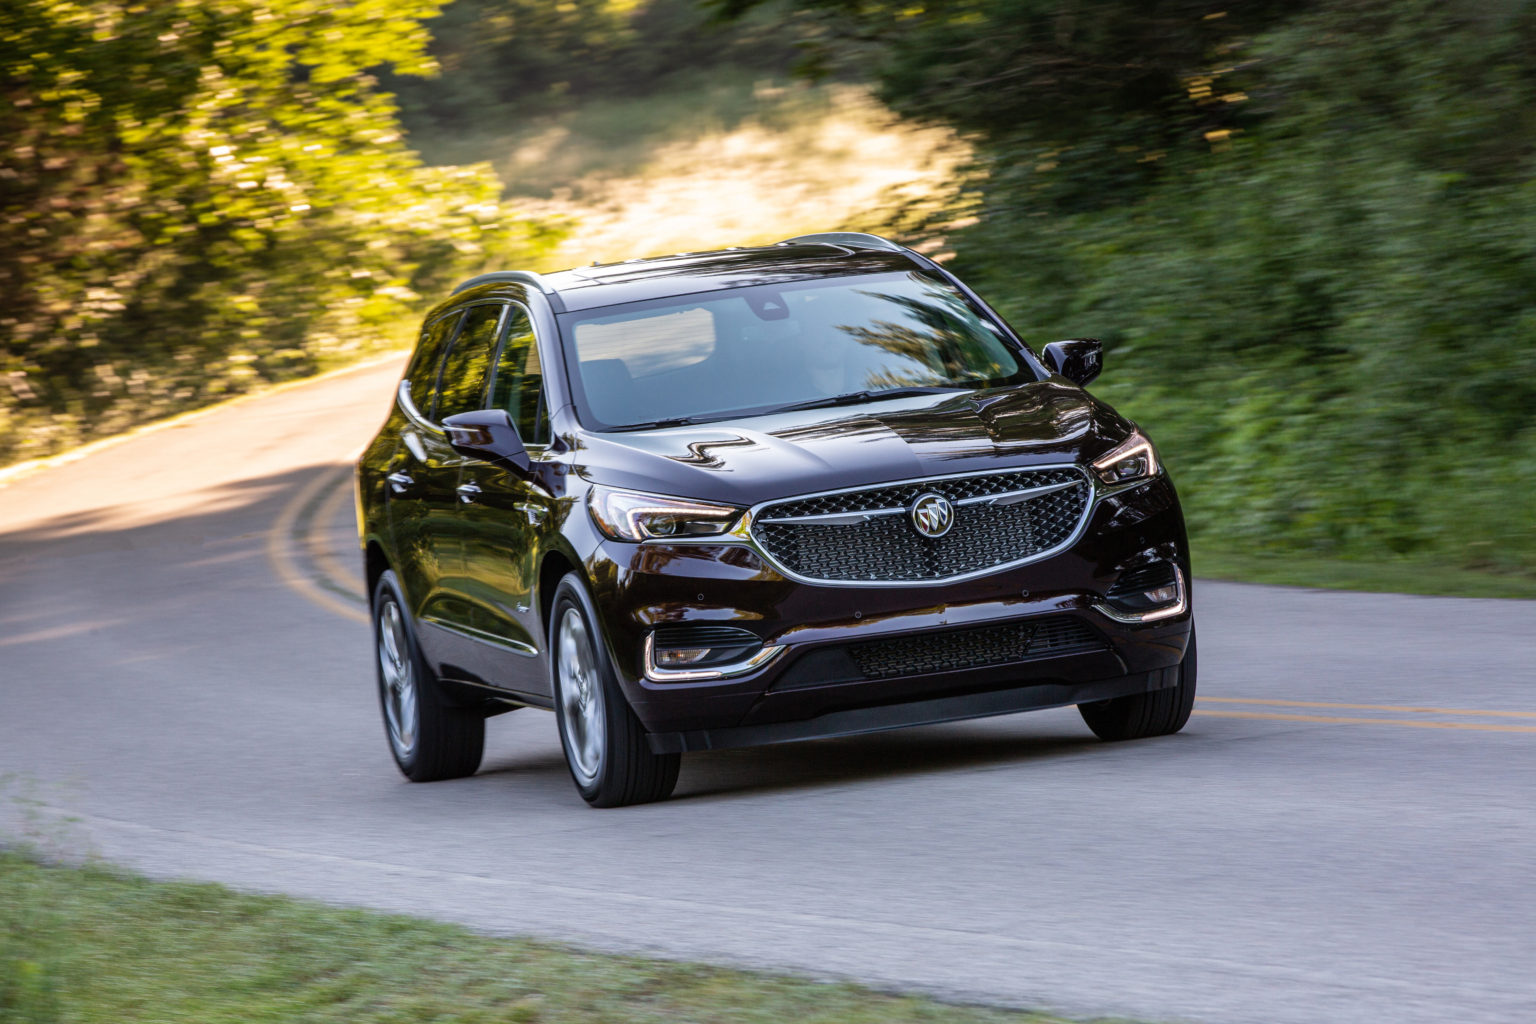 The Enclave Avenir is the top-of-the-line trim level of the SUV for the 2020 model year.